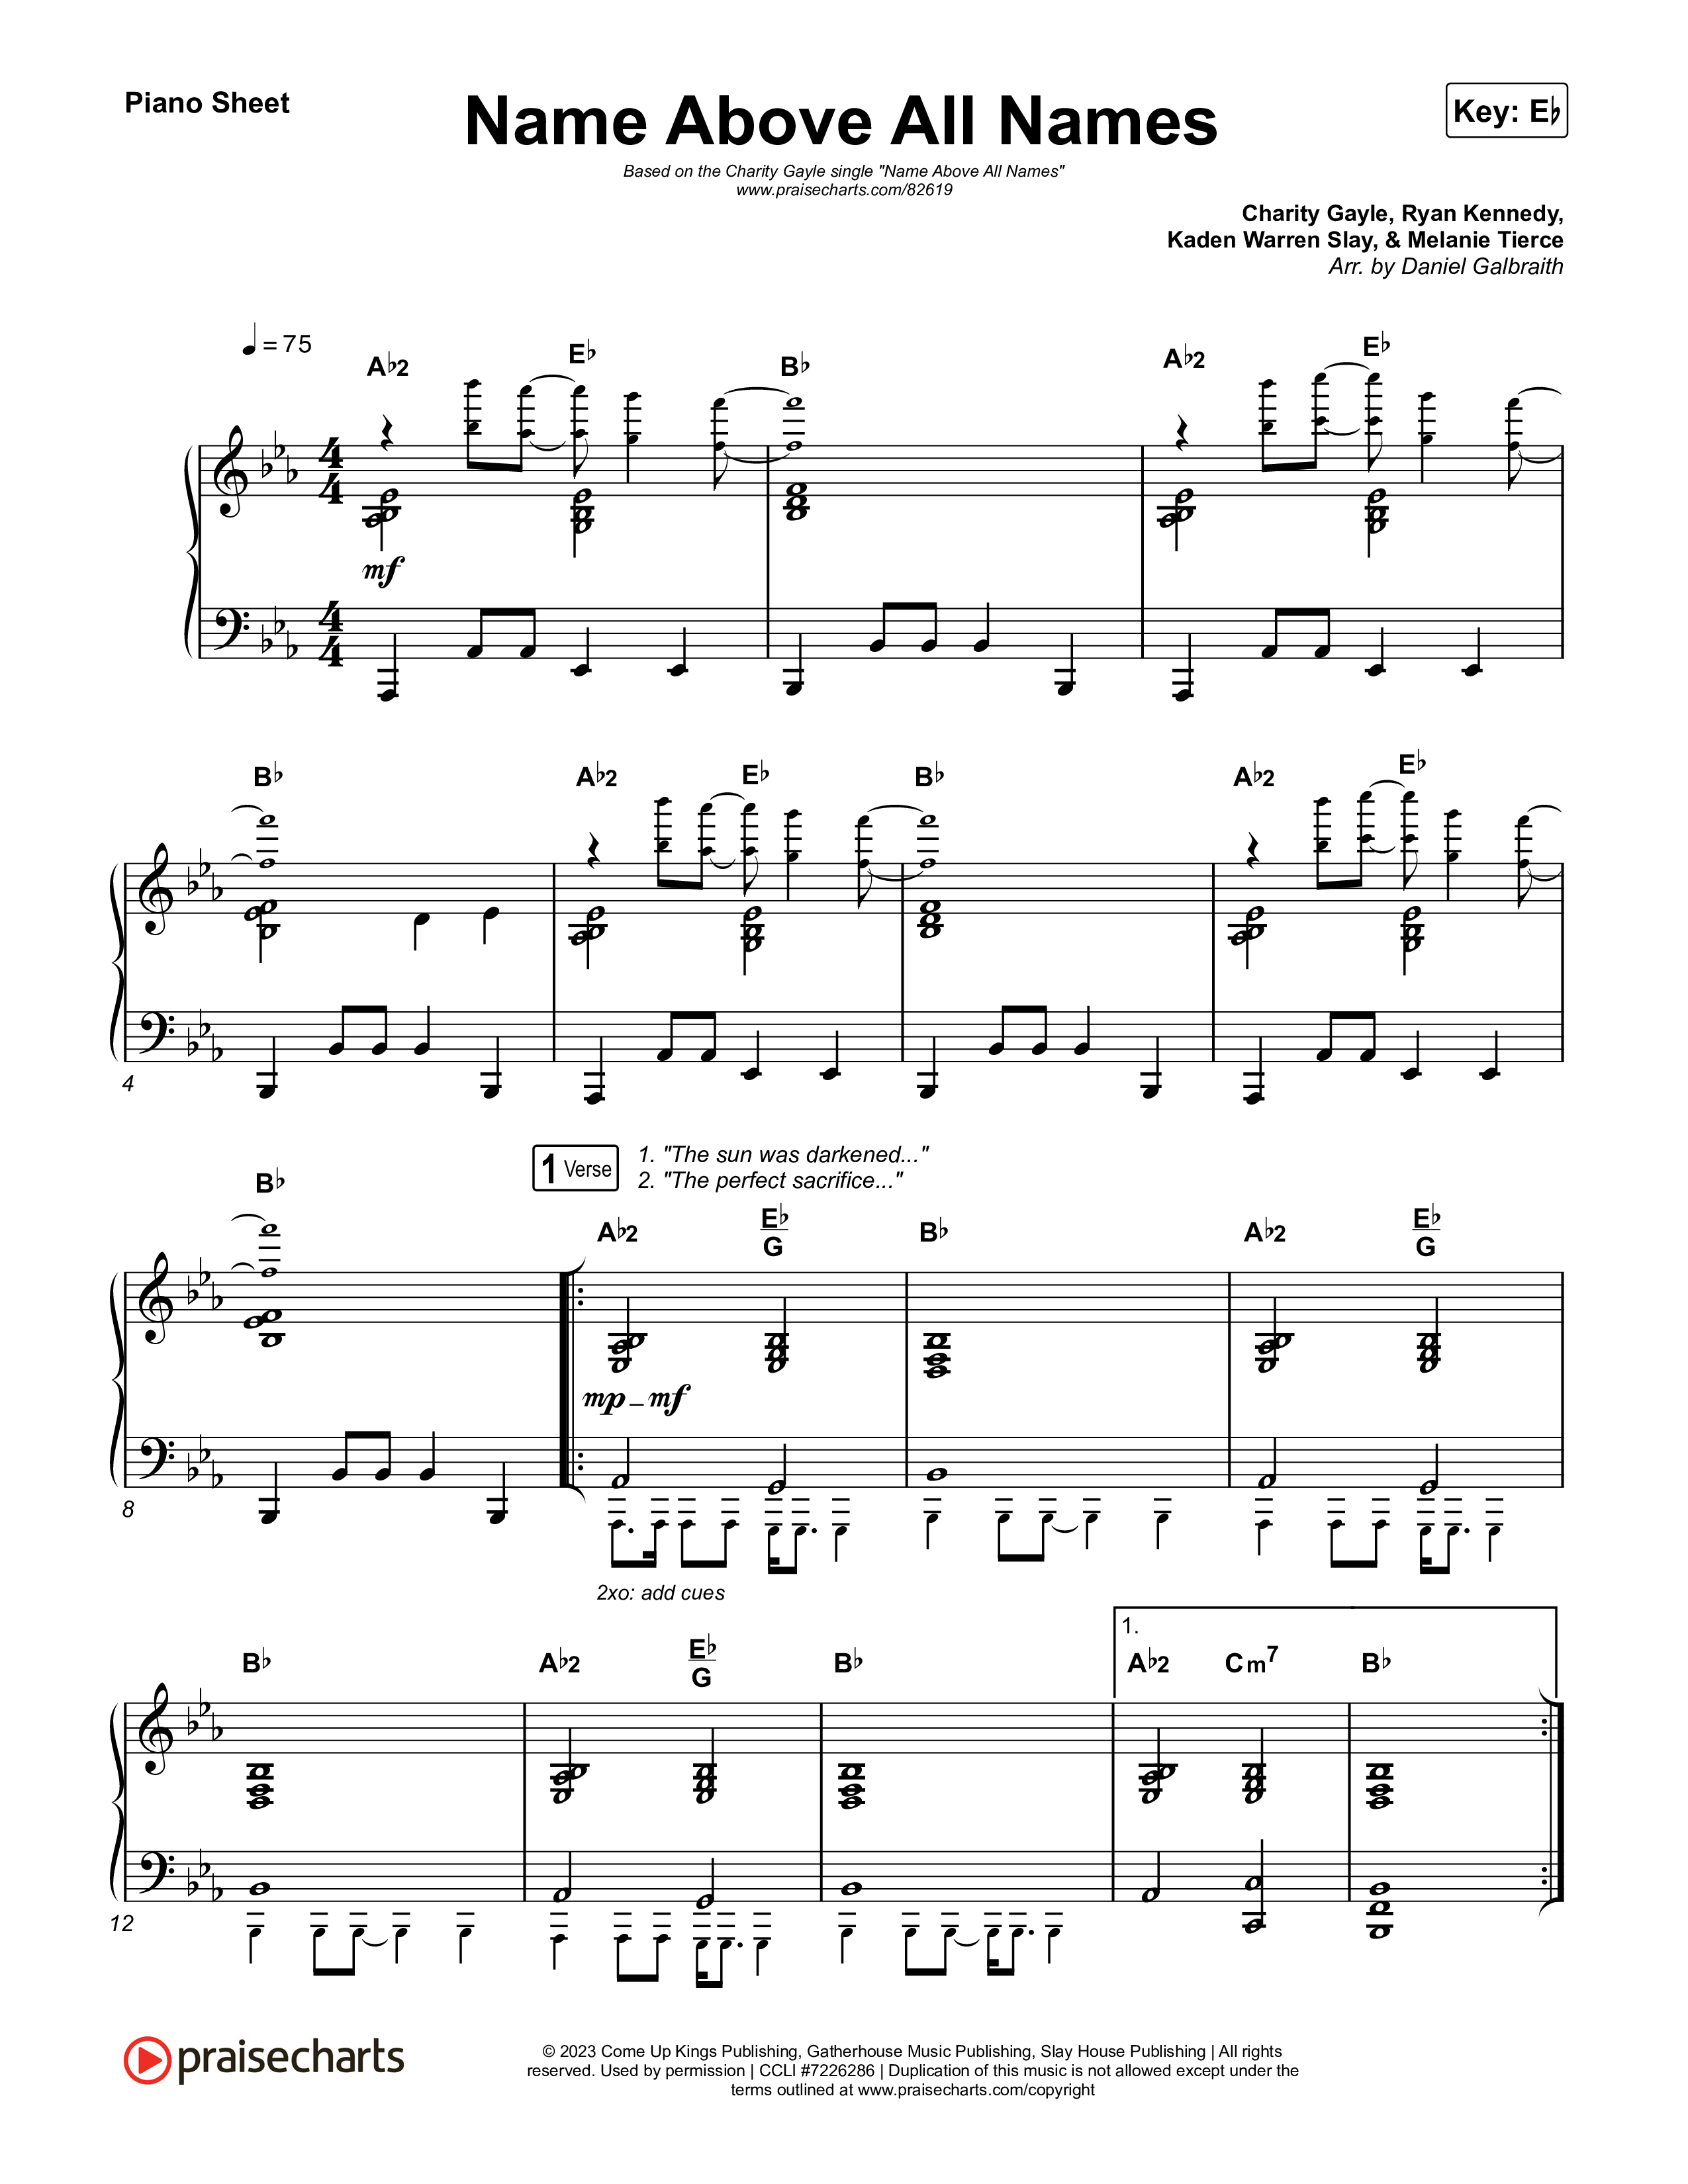 Name Above All Names (Single Version) Piano Sheet (Charity Gayle)